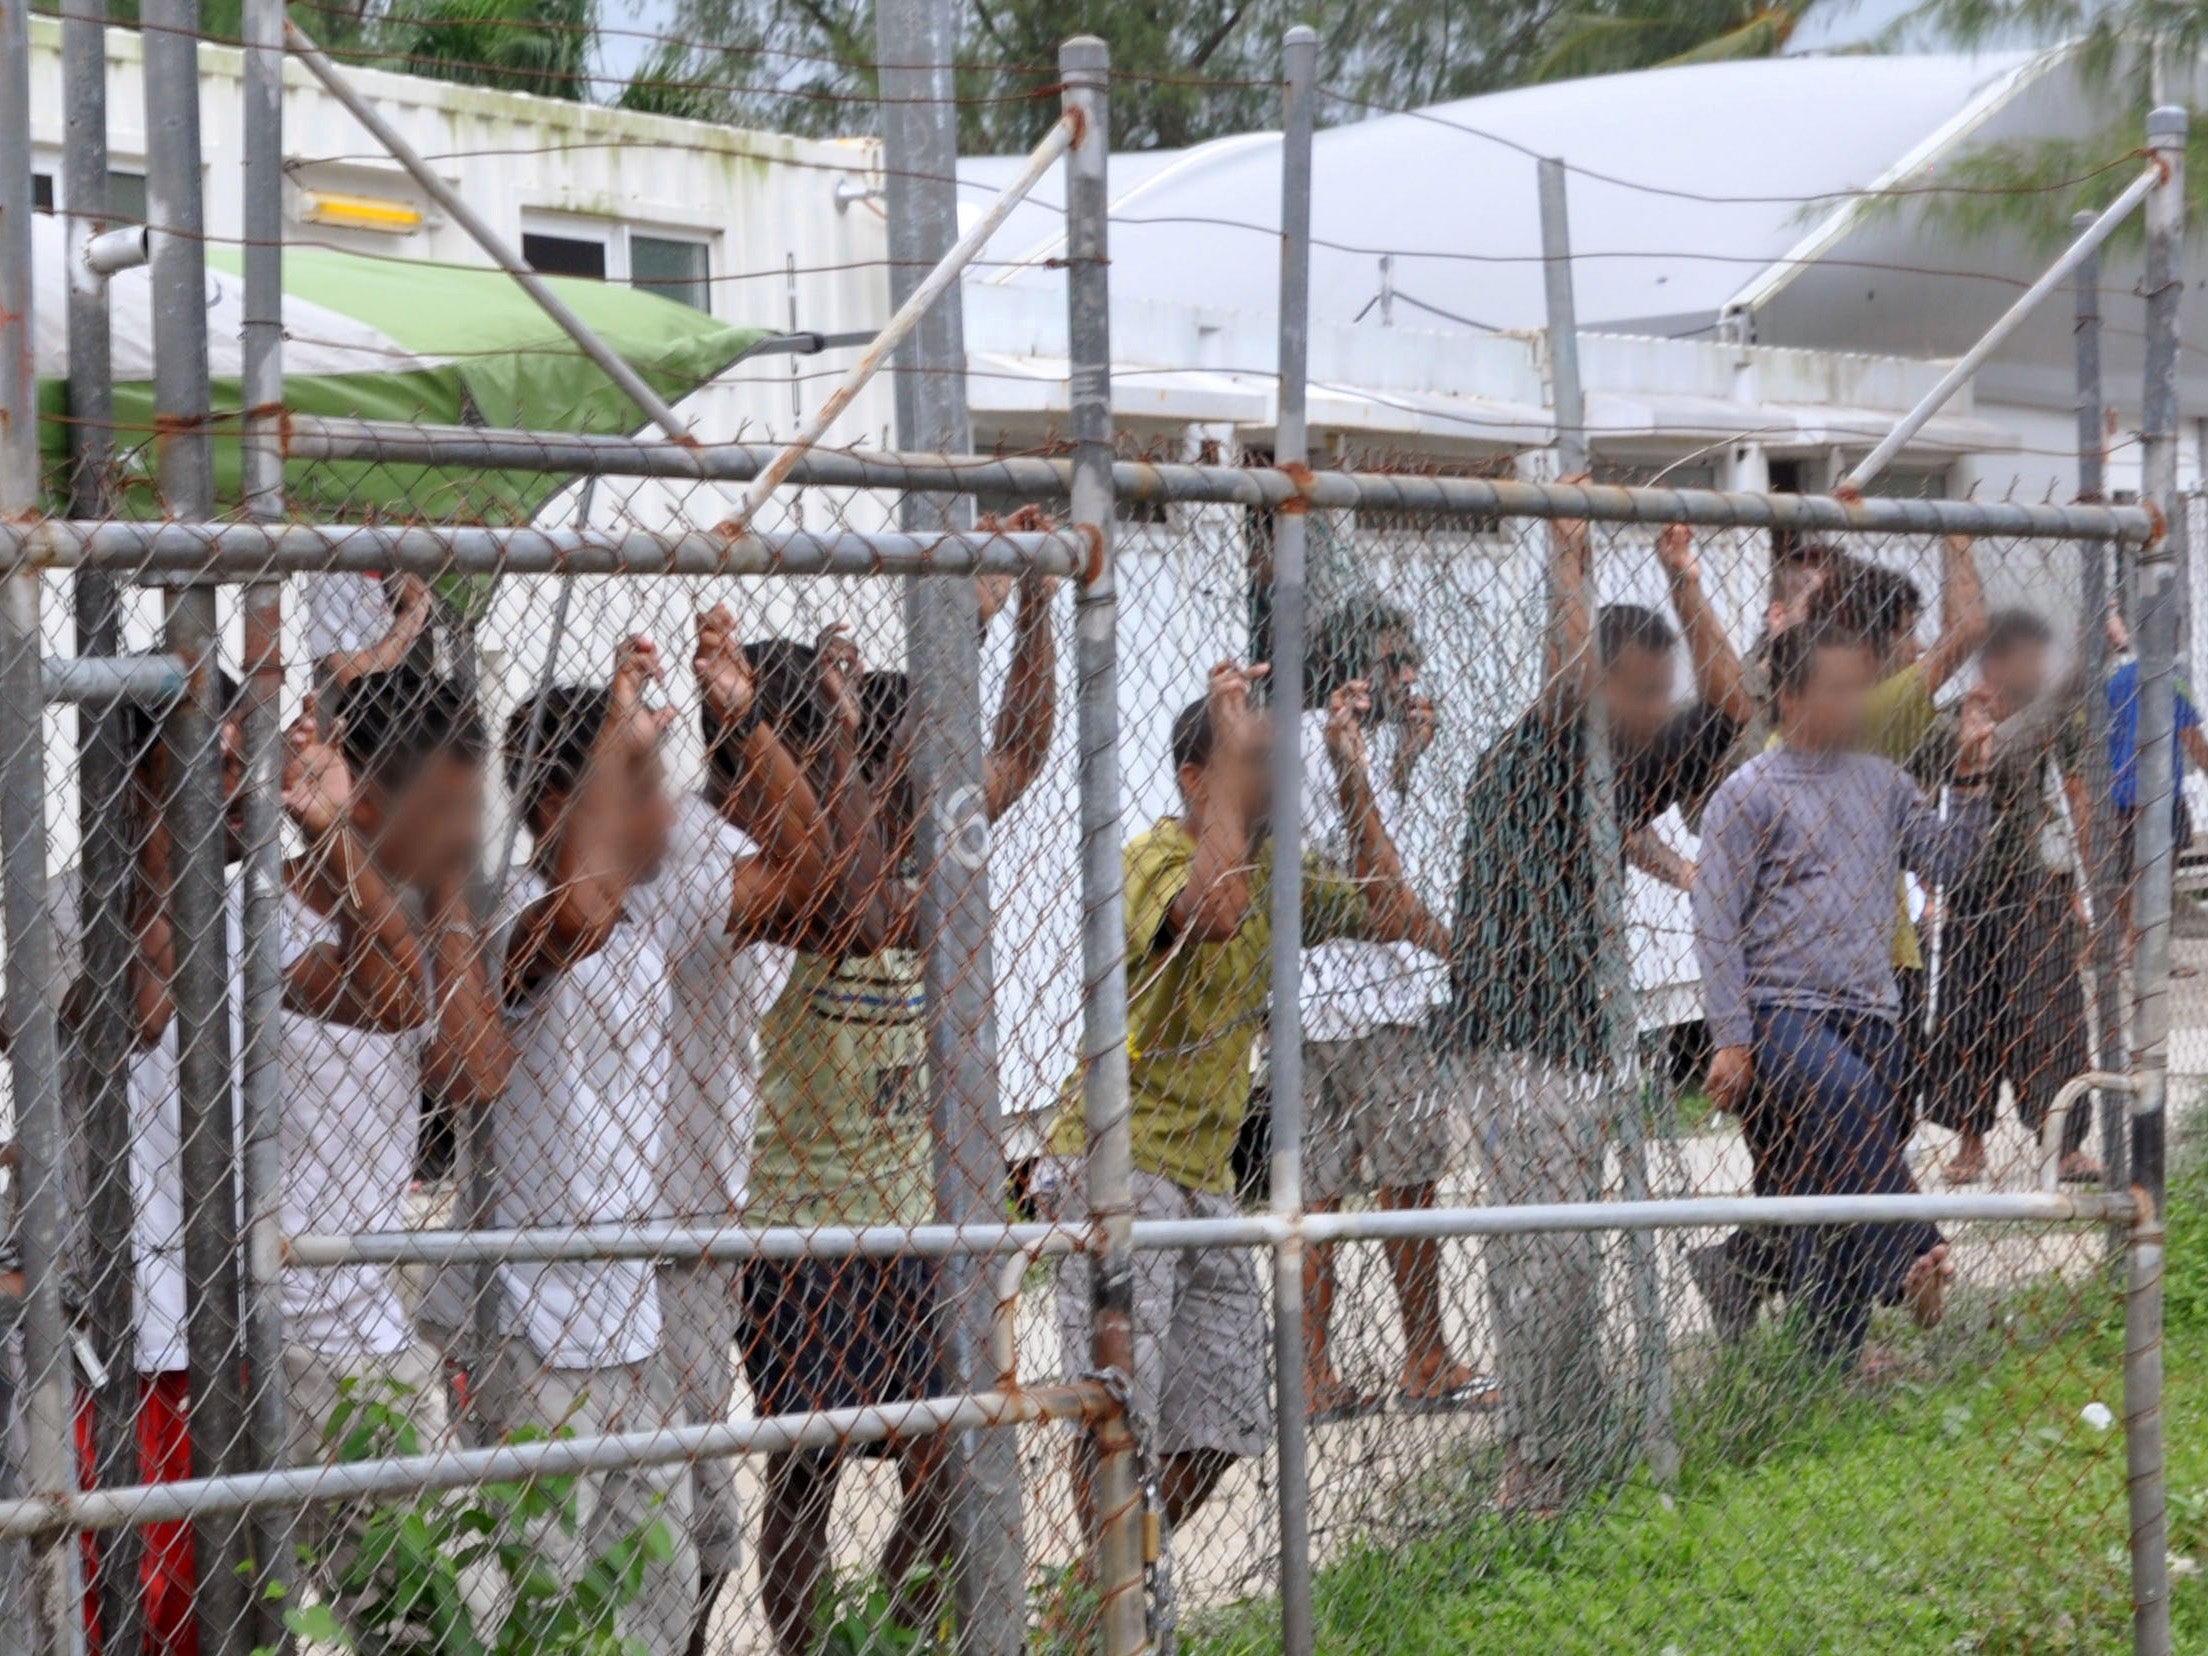 Asylum-seekers look through a fence at the Manus Island detention centre in Papua New Guinea